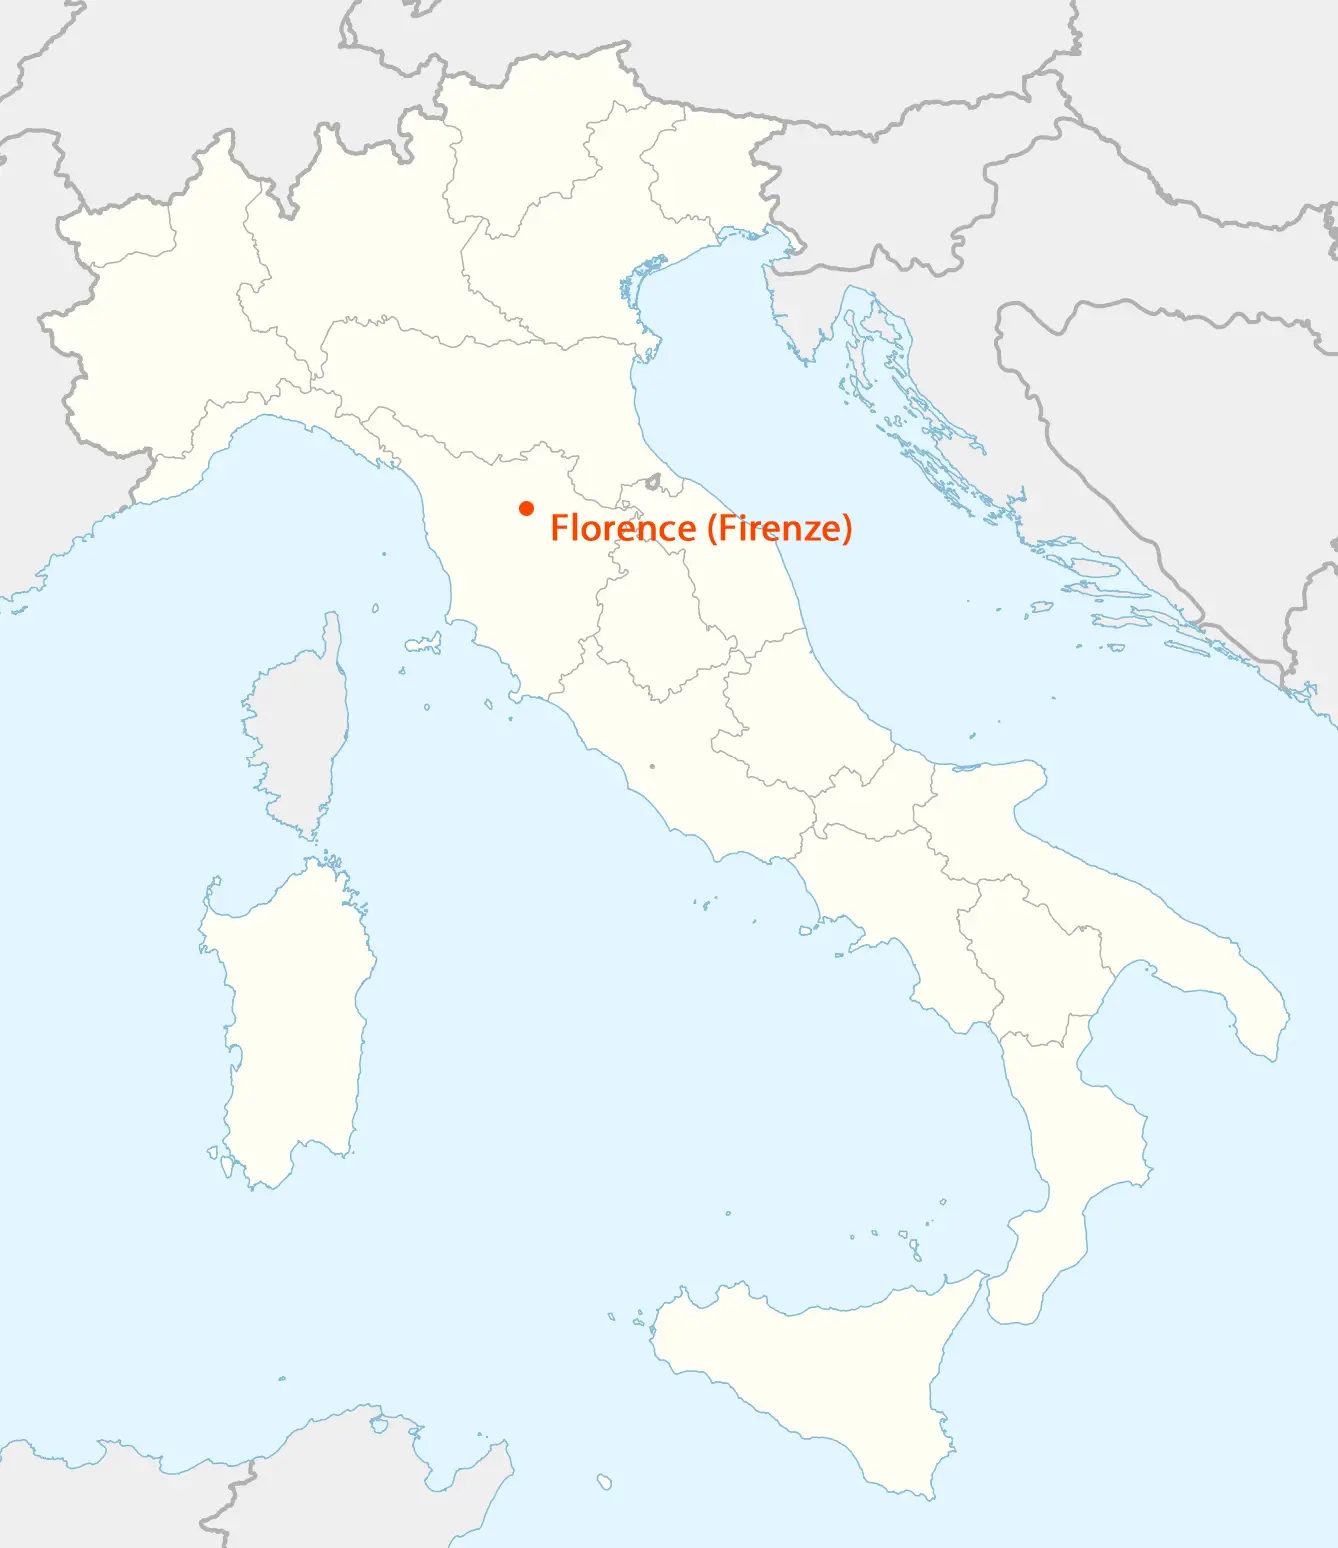 Location of Florence (firenze)